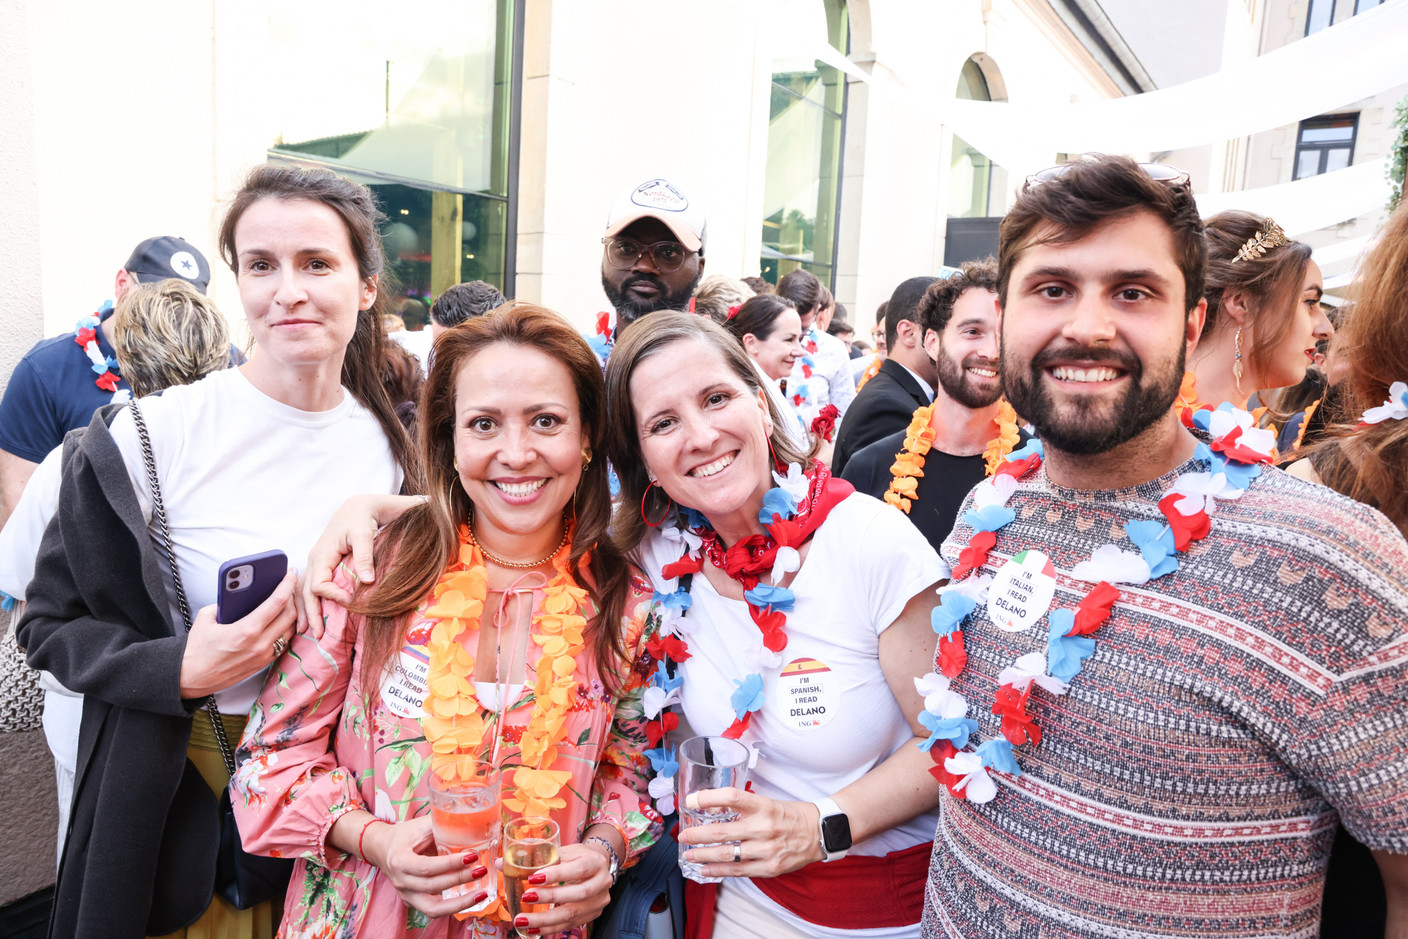 Zuza Reda-Jakima (Pink Not Red), on left, Bárbara Daroca (ING), second from right, seen during the Delano summer party, 13 July 2023. Photo: Marie Russillo/Maison Moderne